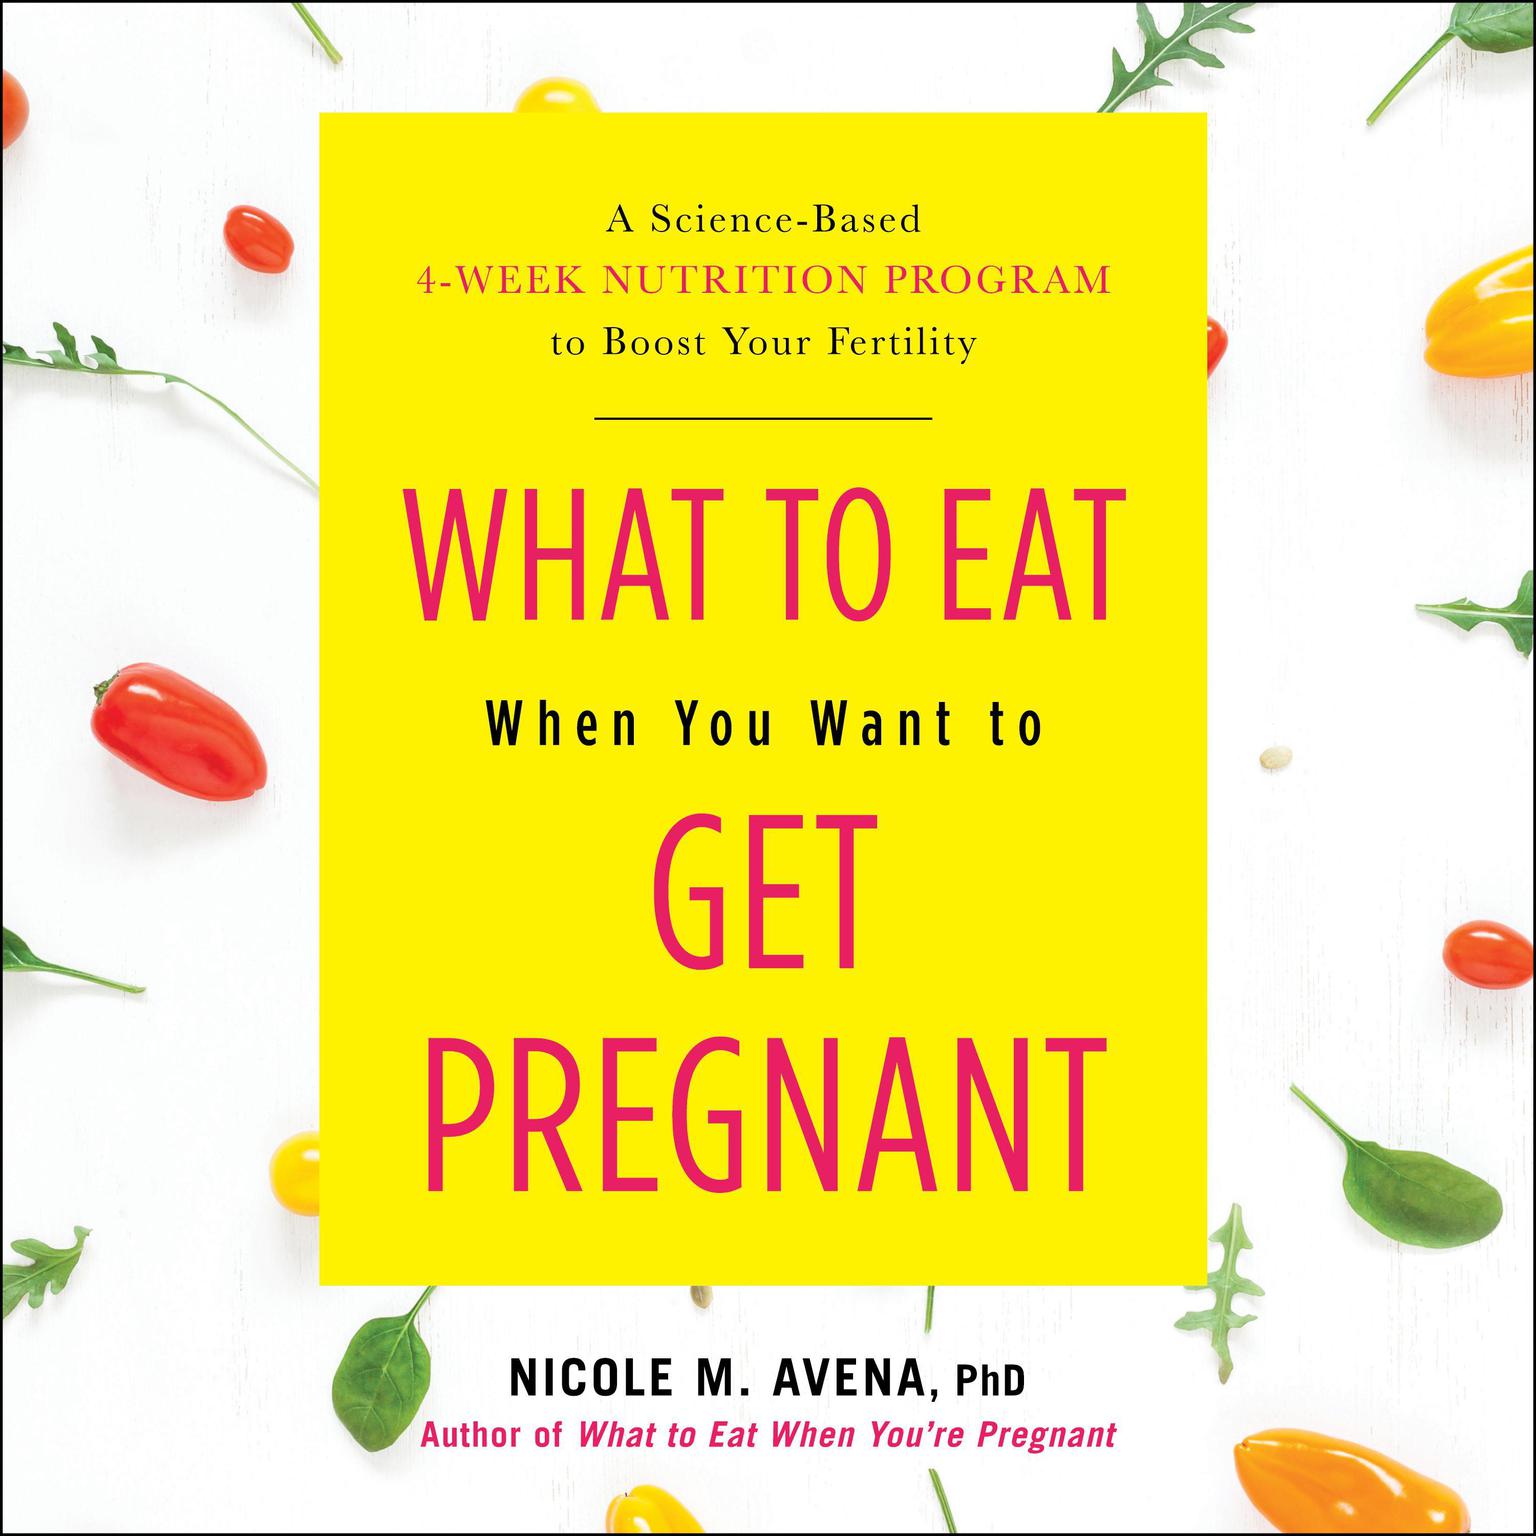 What to Eat When You Want to Get Pregnant: A Science-Based 4-Week Nutrition Program to Boost Your Fertility Audiobook, by Nicole M. Avena